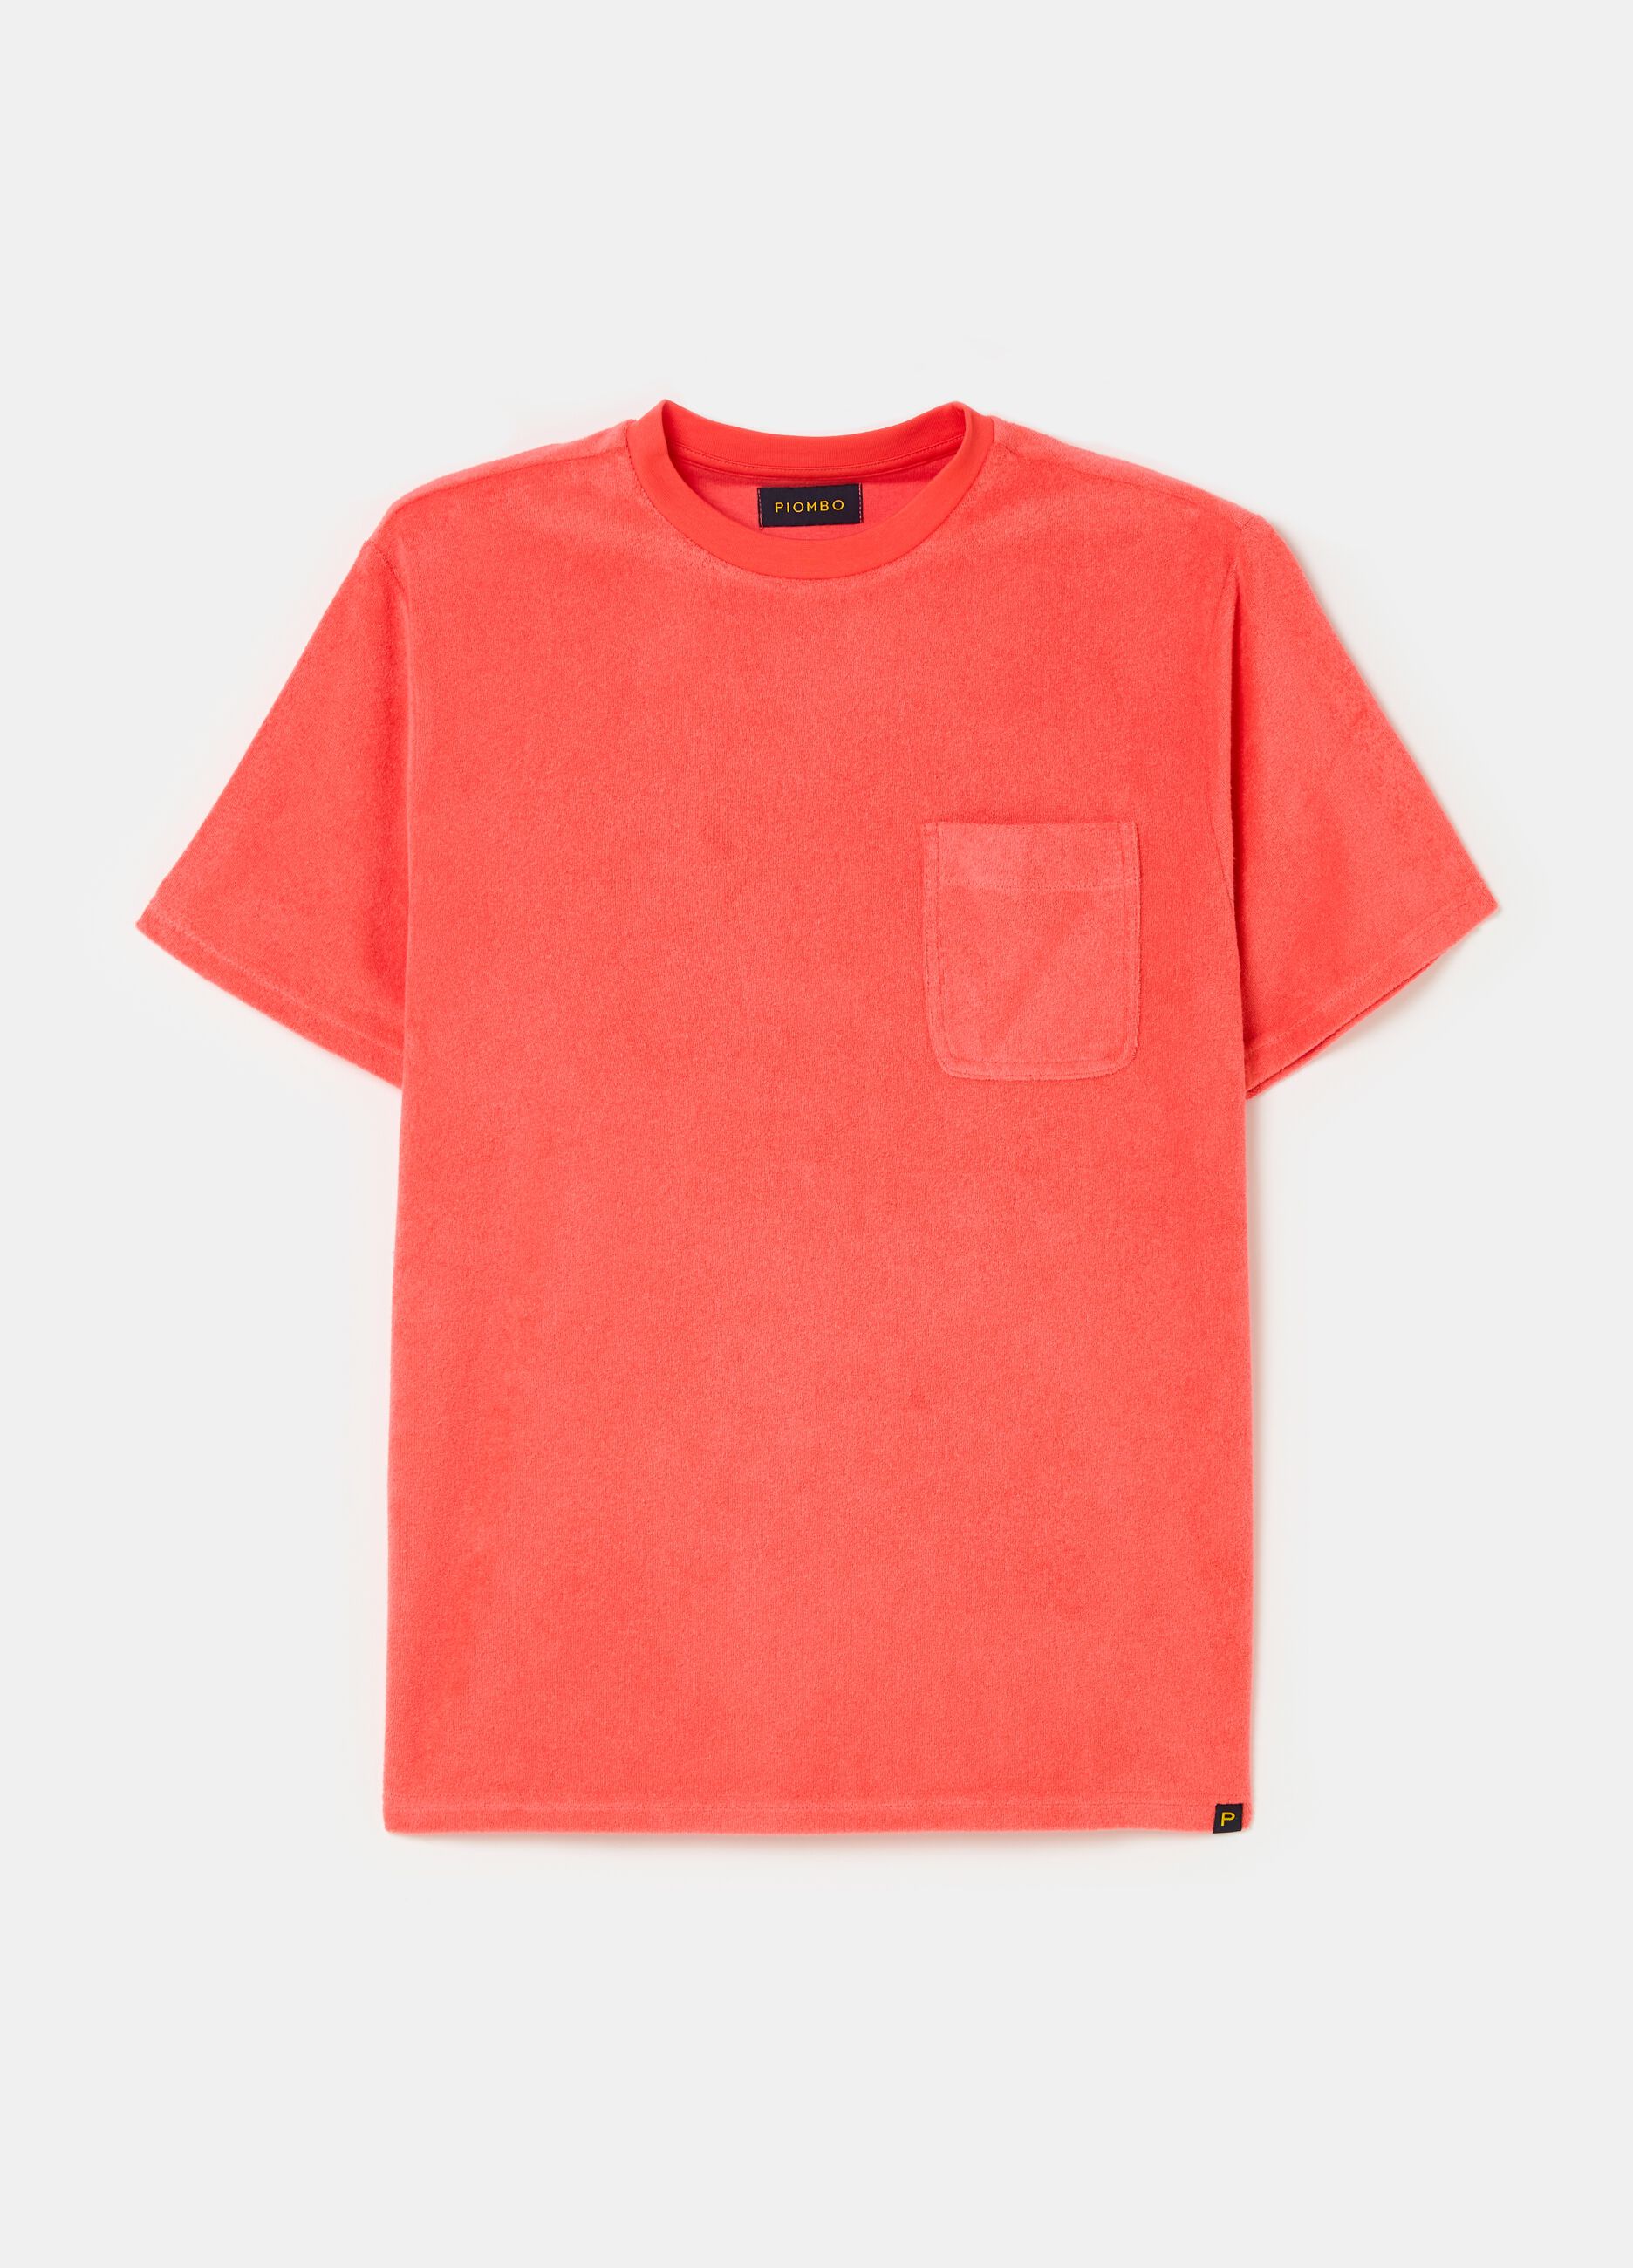 Reverse French terry T-shirt with pocket